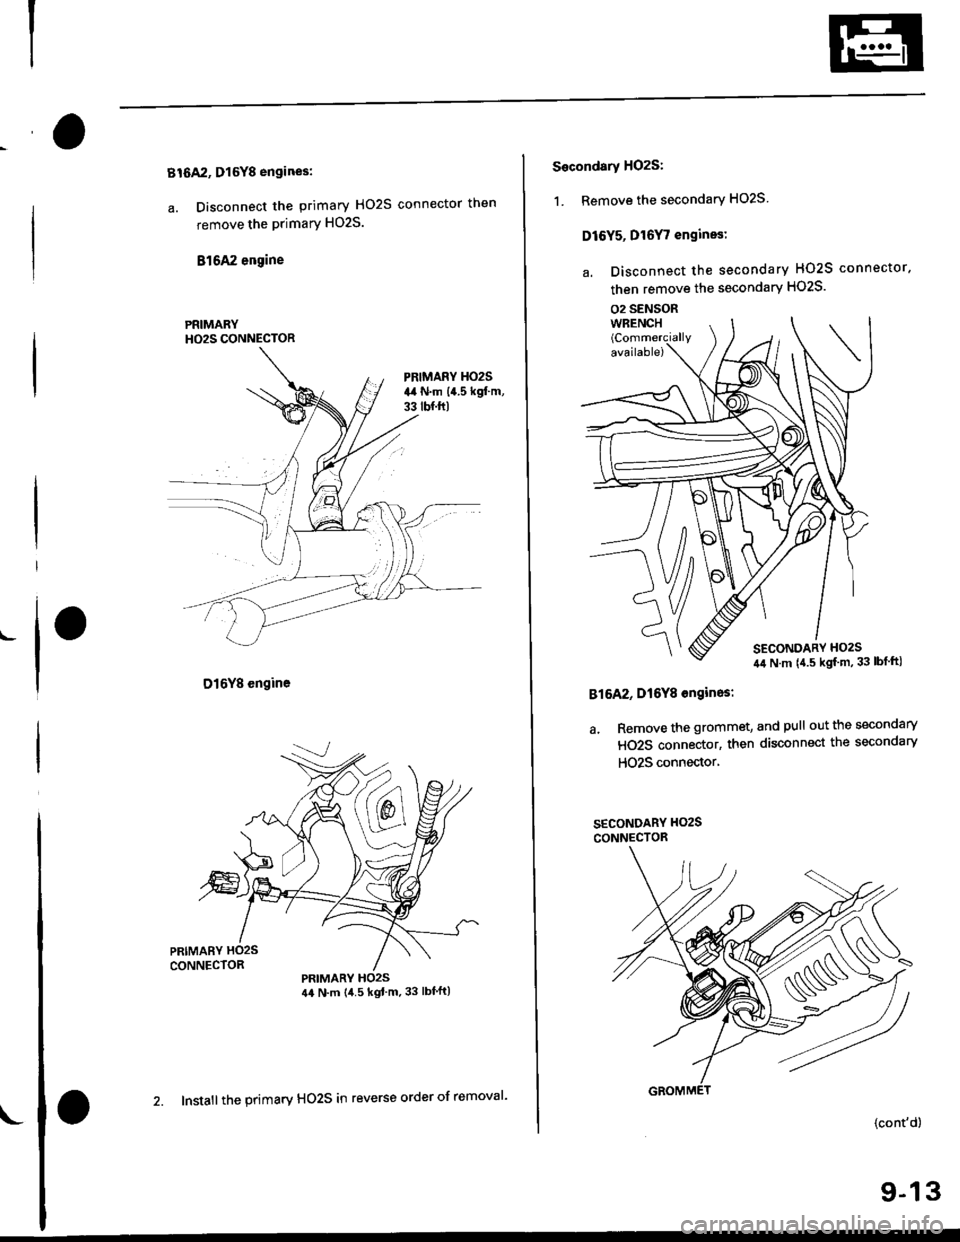 HONDA CIVIC 1998 6.G Workshop Manual Bt6A2, Dl6Y8 engines:
a. Disconnect the primary HO2S connector then
remove the primary HO2S.
816A2 engine
D16Y8 engine
PRIMARYH02S CONNECTOR
PRIMARY HO2S44 N.m {4.5 kgtm.33 lbfft)
L
2. Install the p